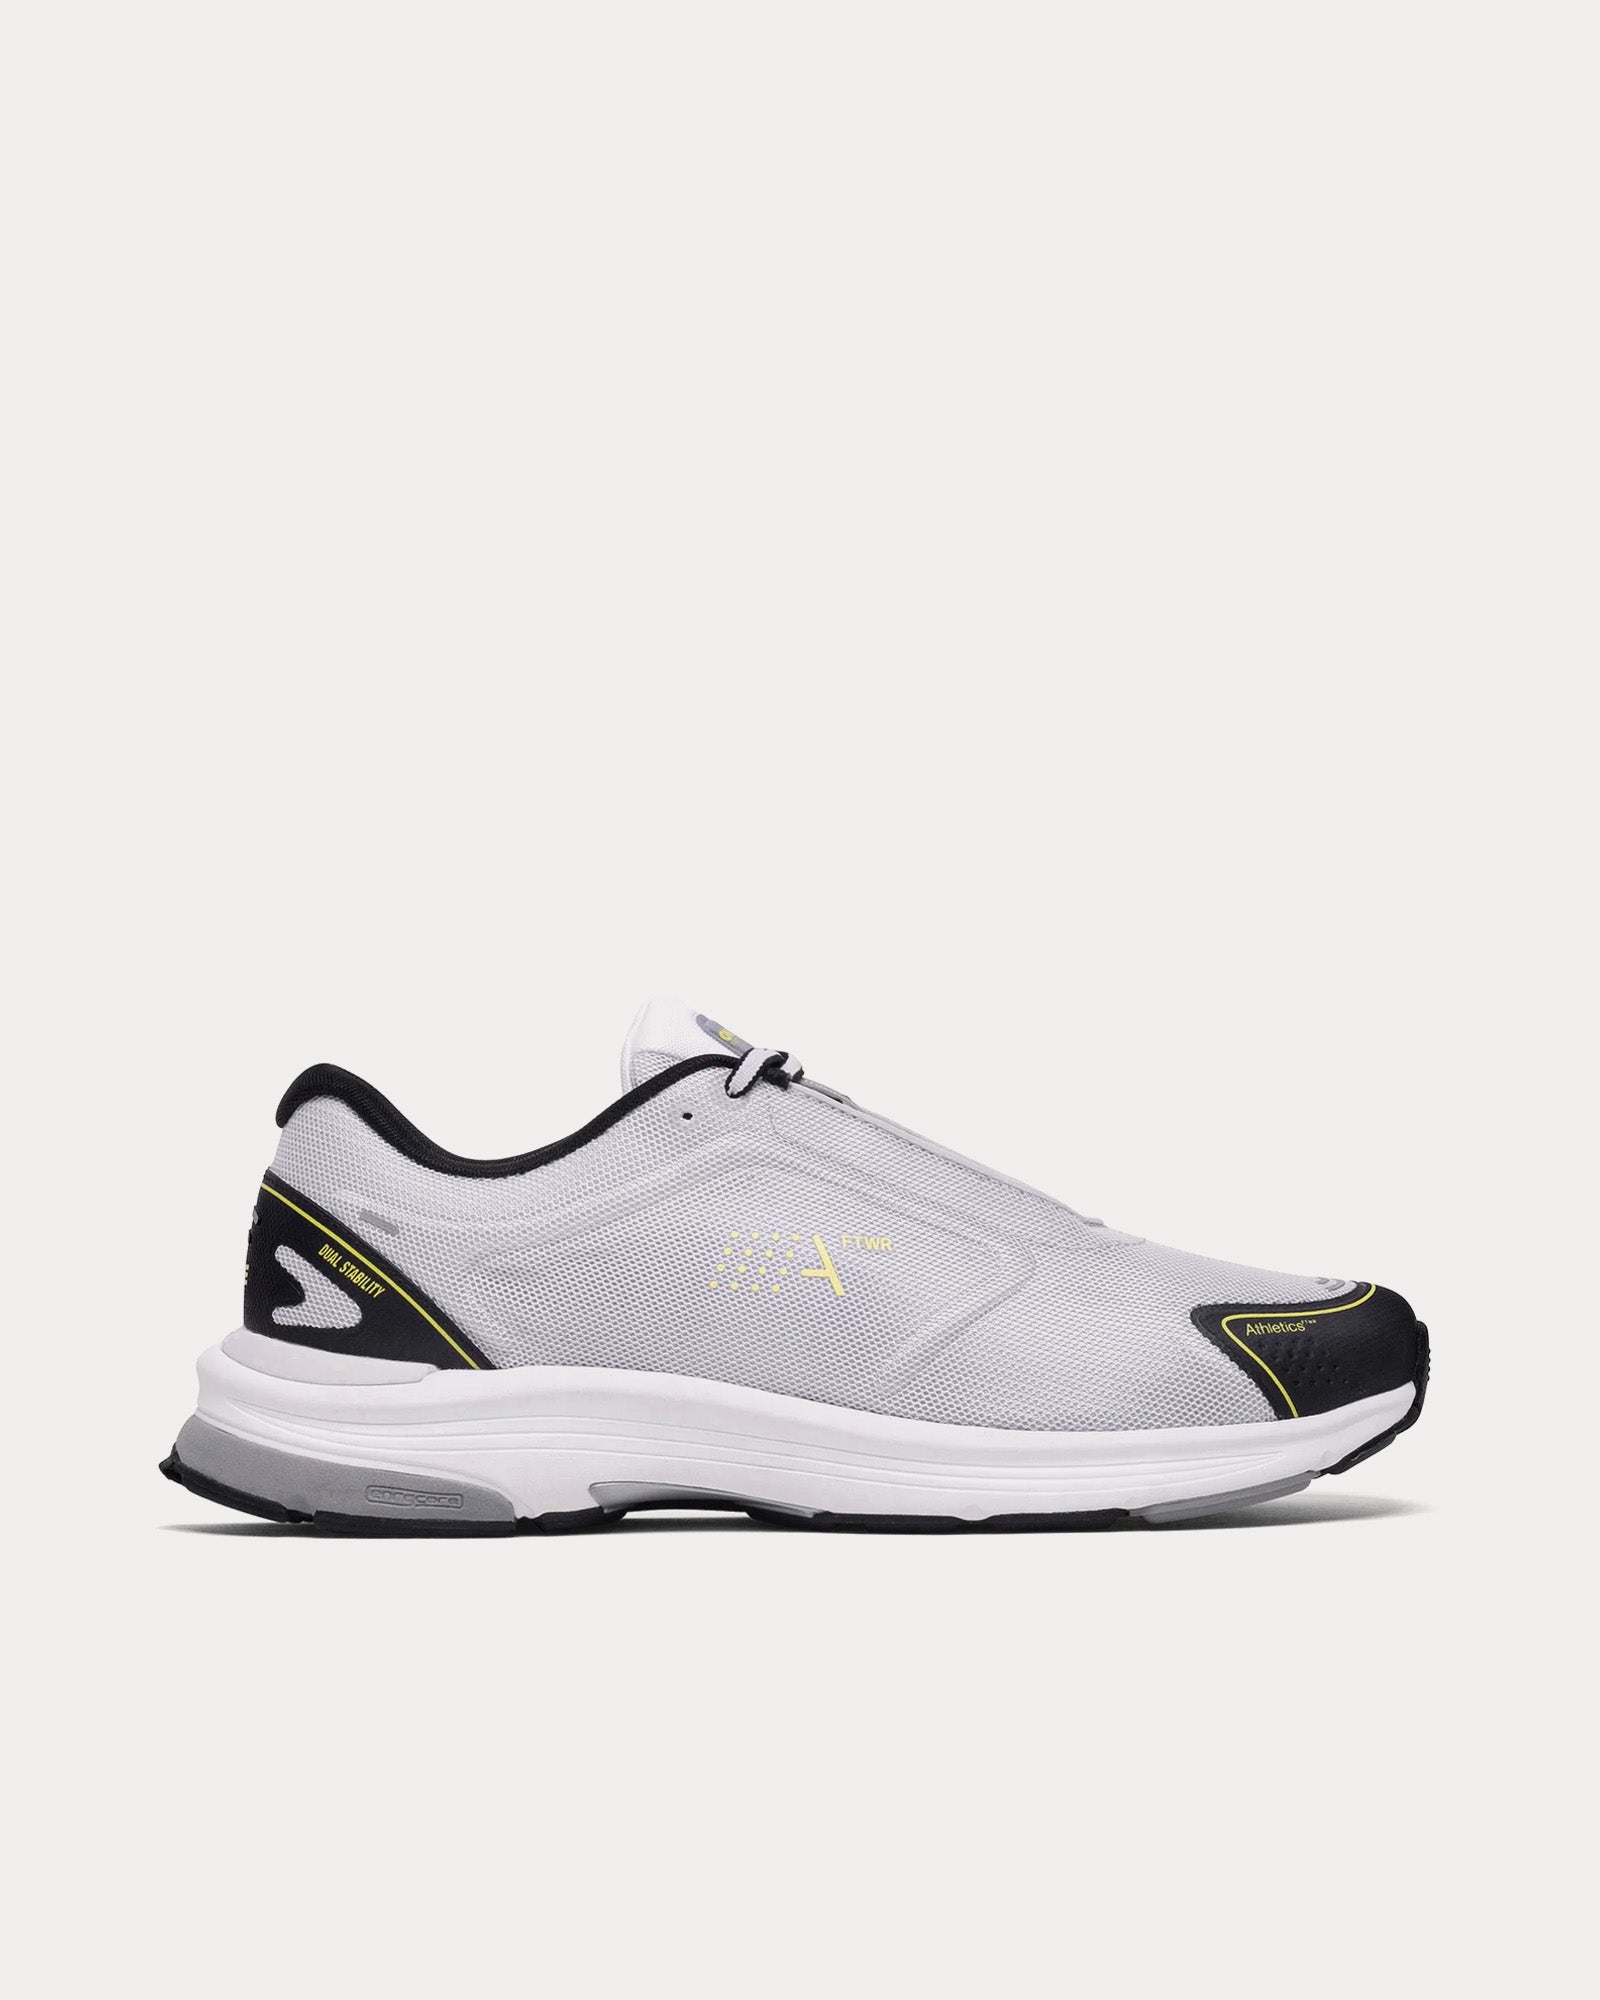 Athletics FTWR - One Remastered Silver / Black Low Top Sneakers